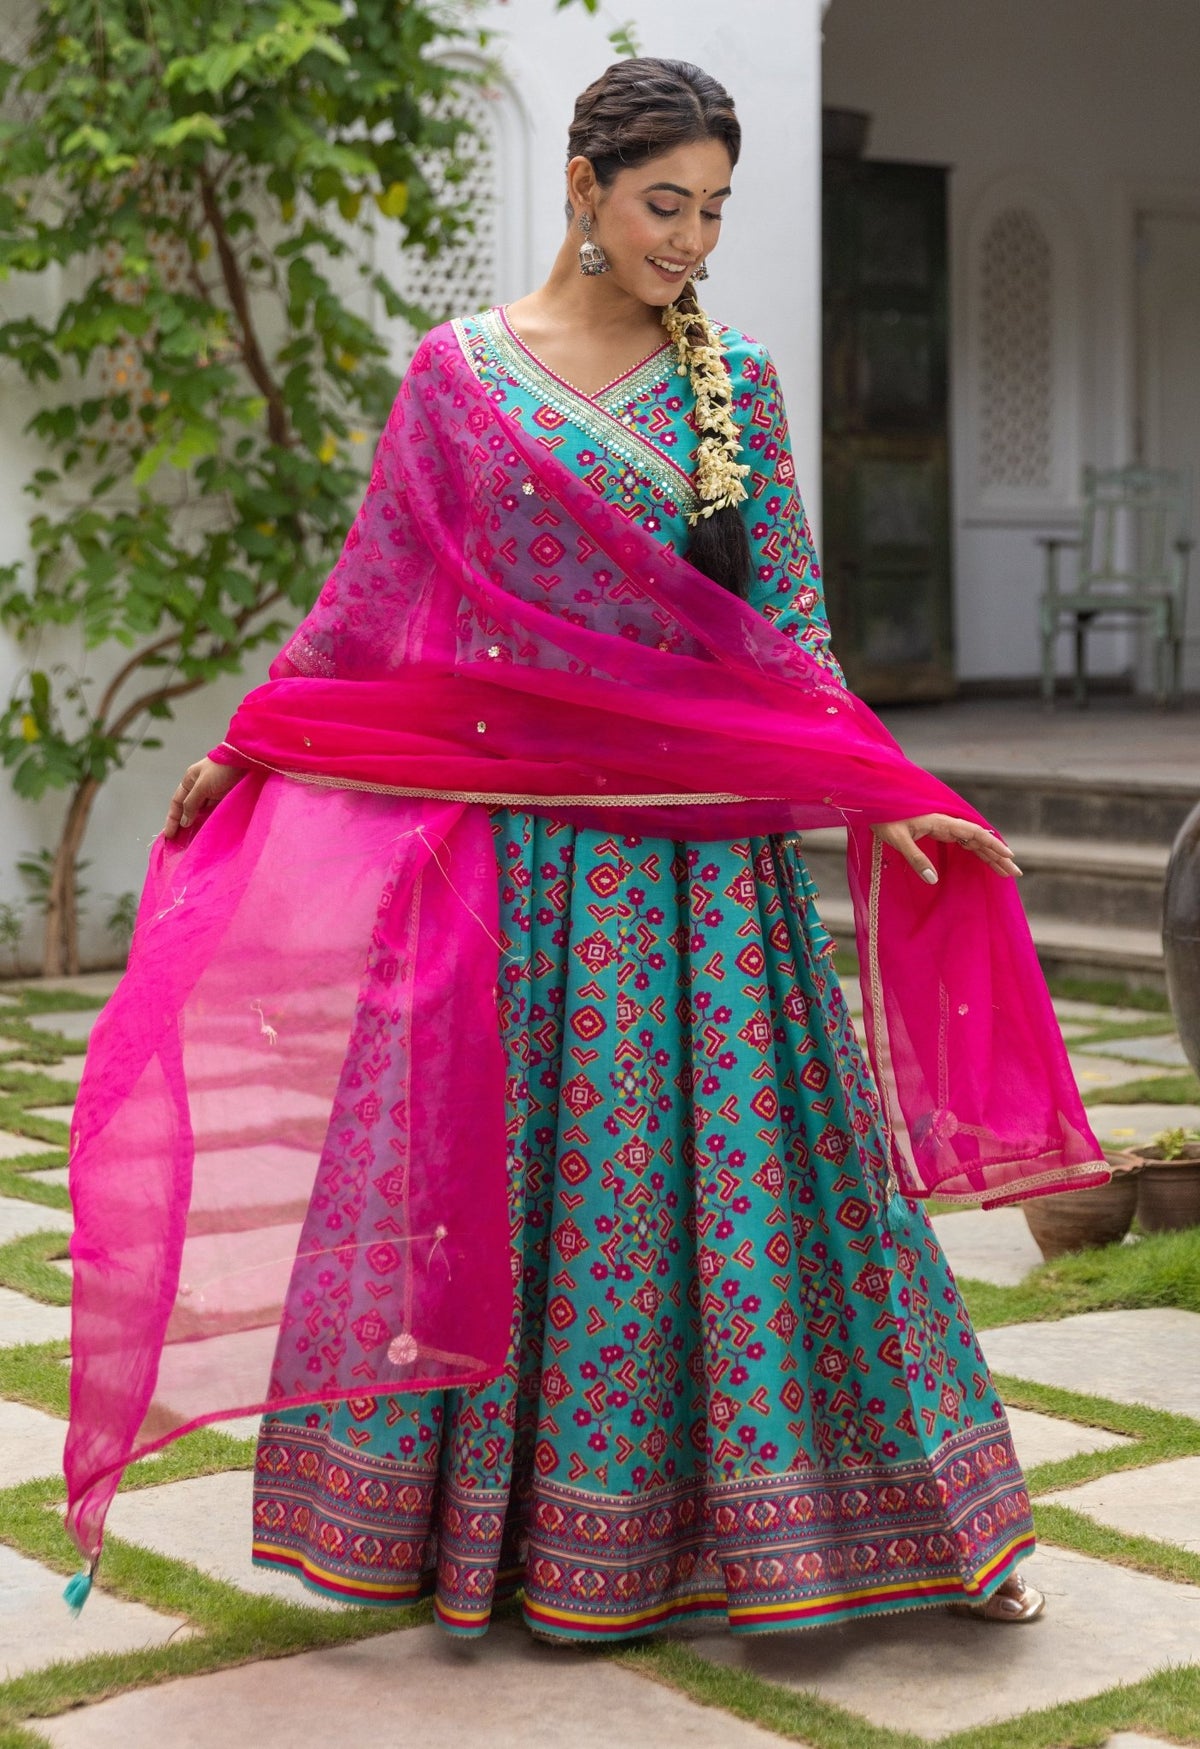 Ethnic Dresses - Shop the Most Trendy and Designer Ethnic Wear